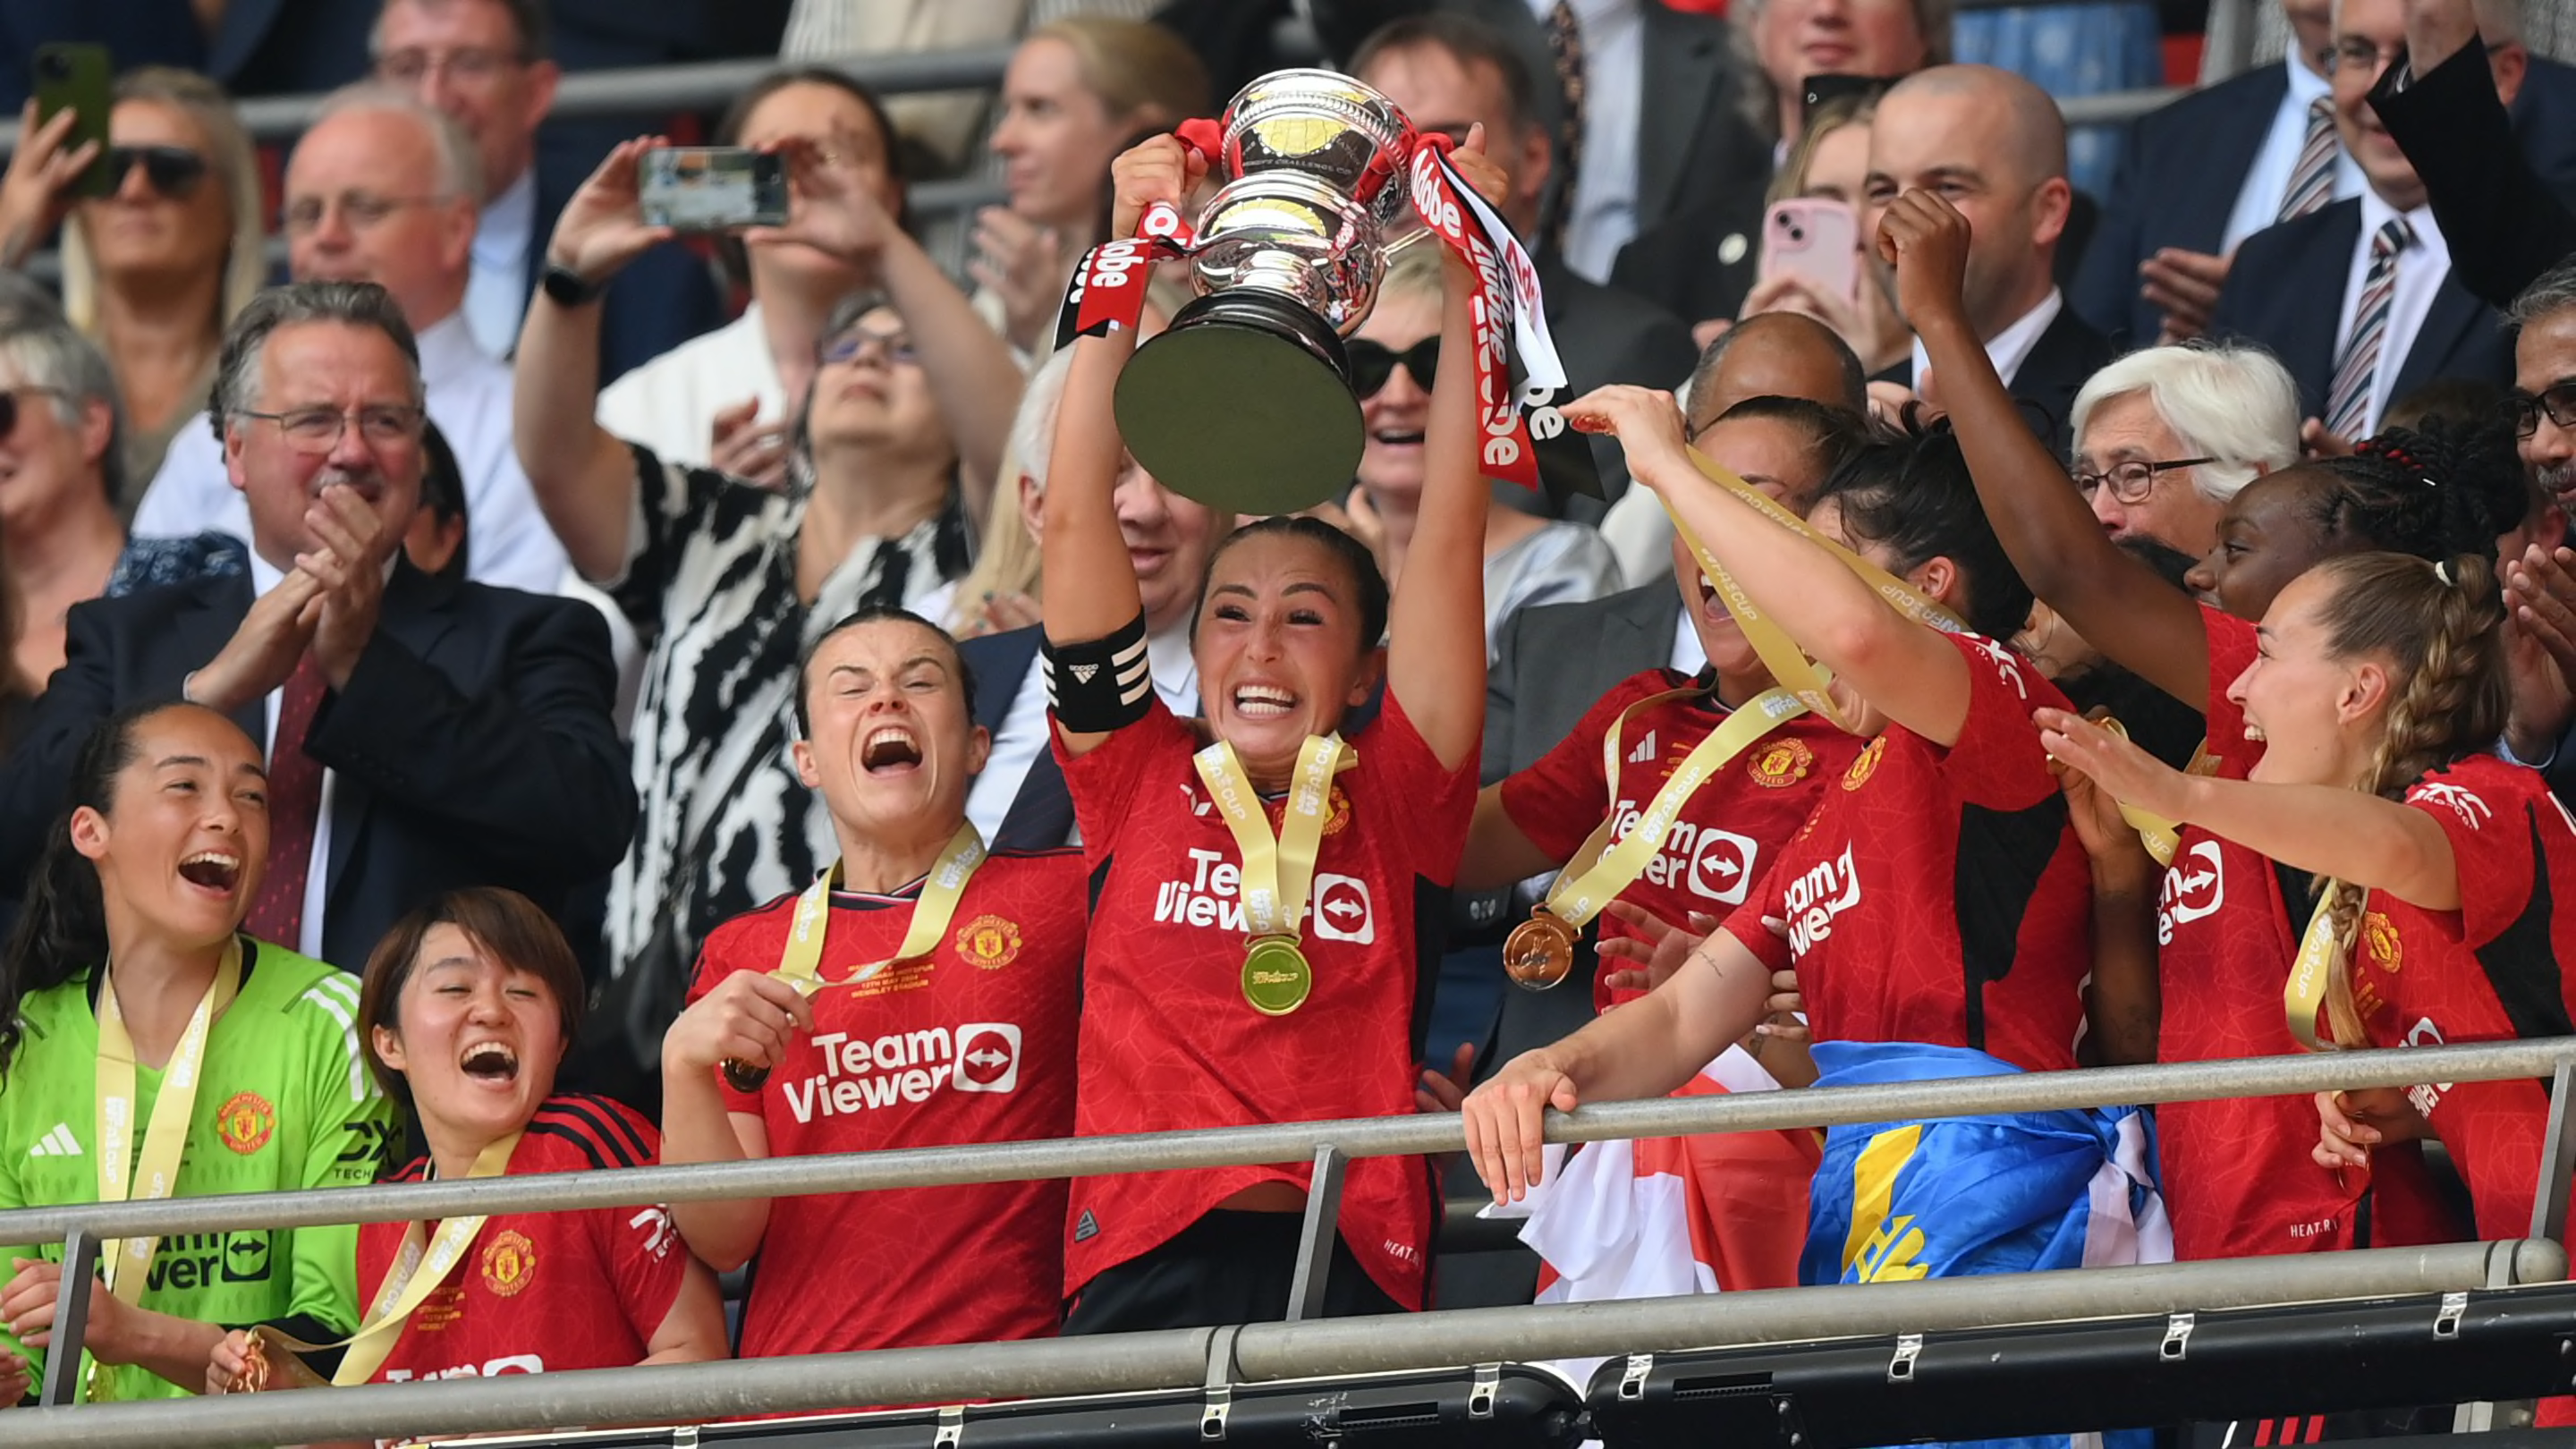 Man Utd Women's wait for a major trophy ends in style at Wembley